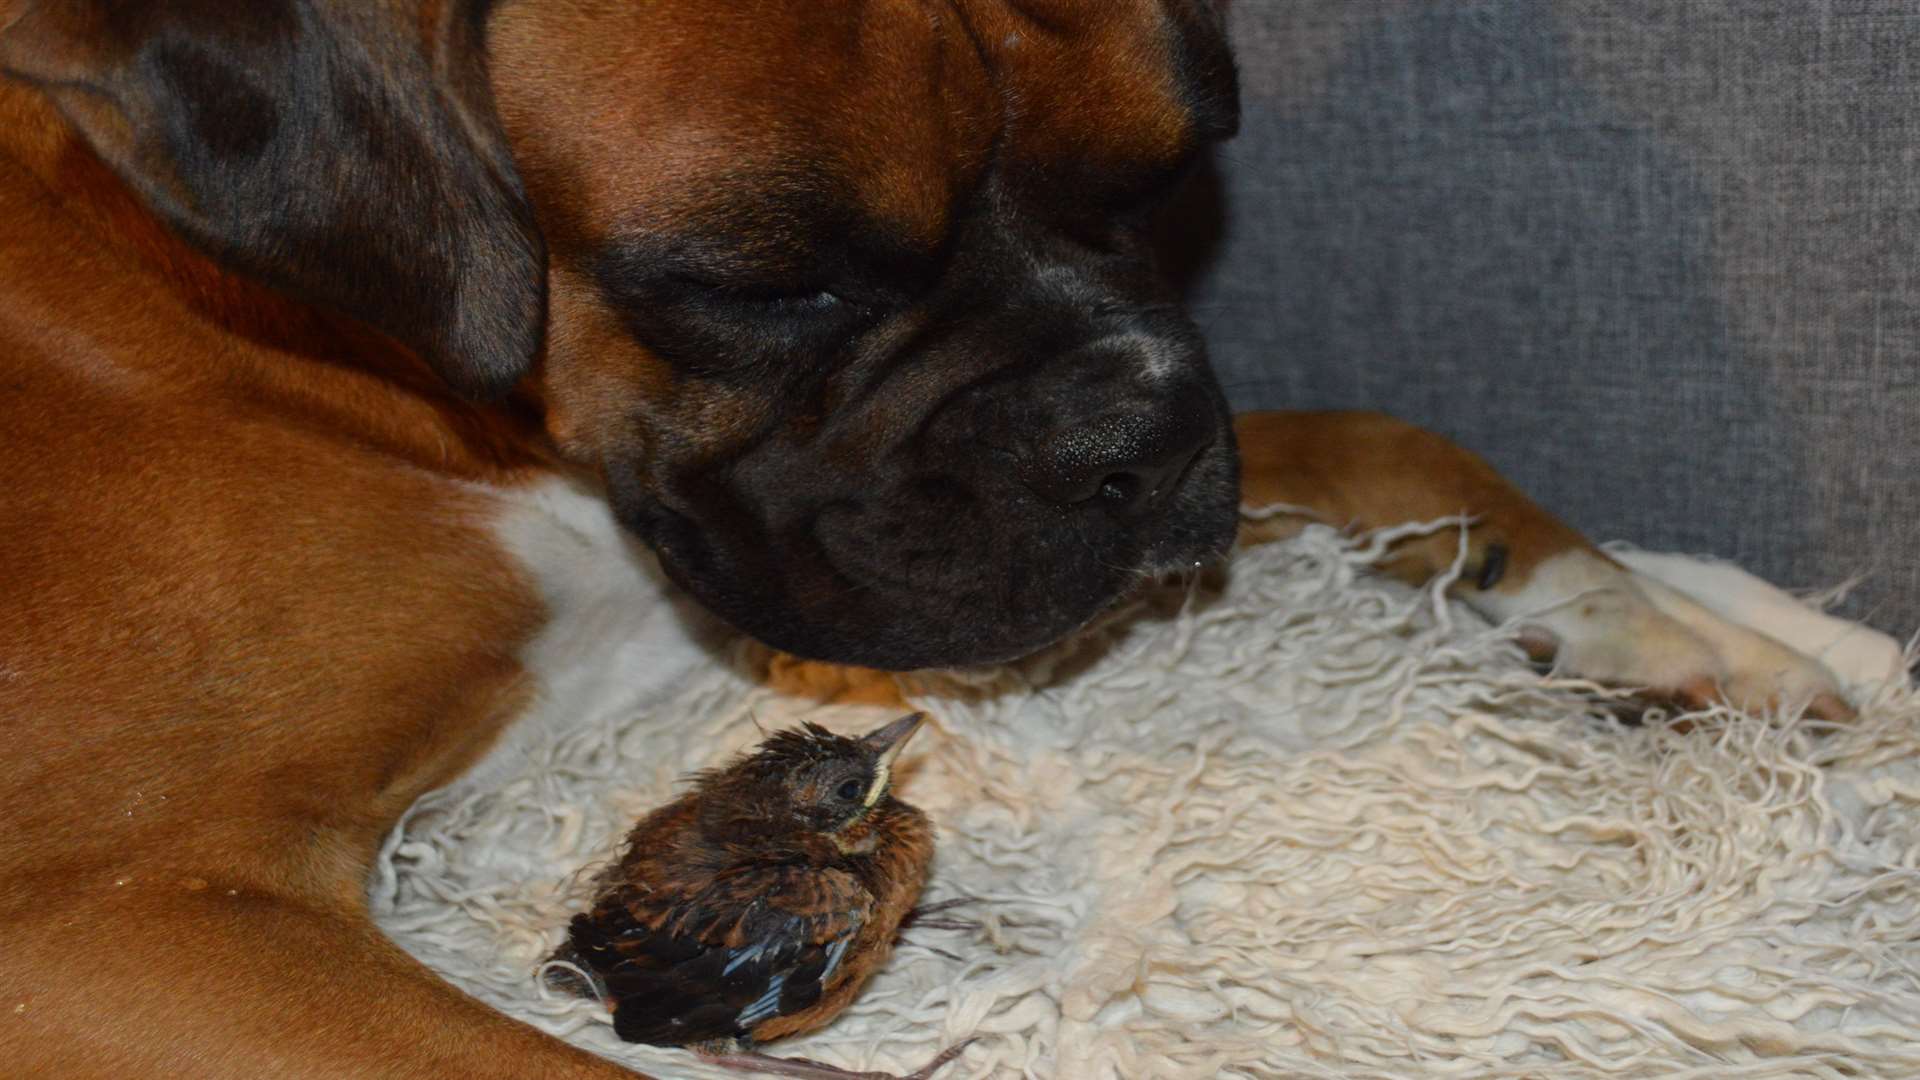 Rusty and 'birddog' have become inseparable